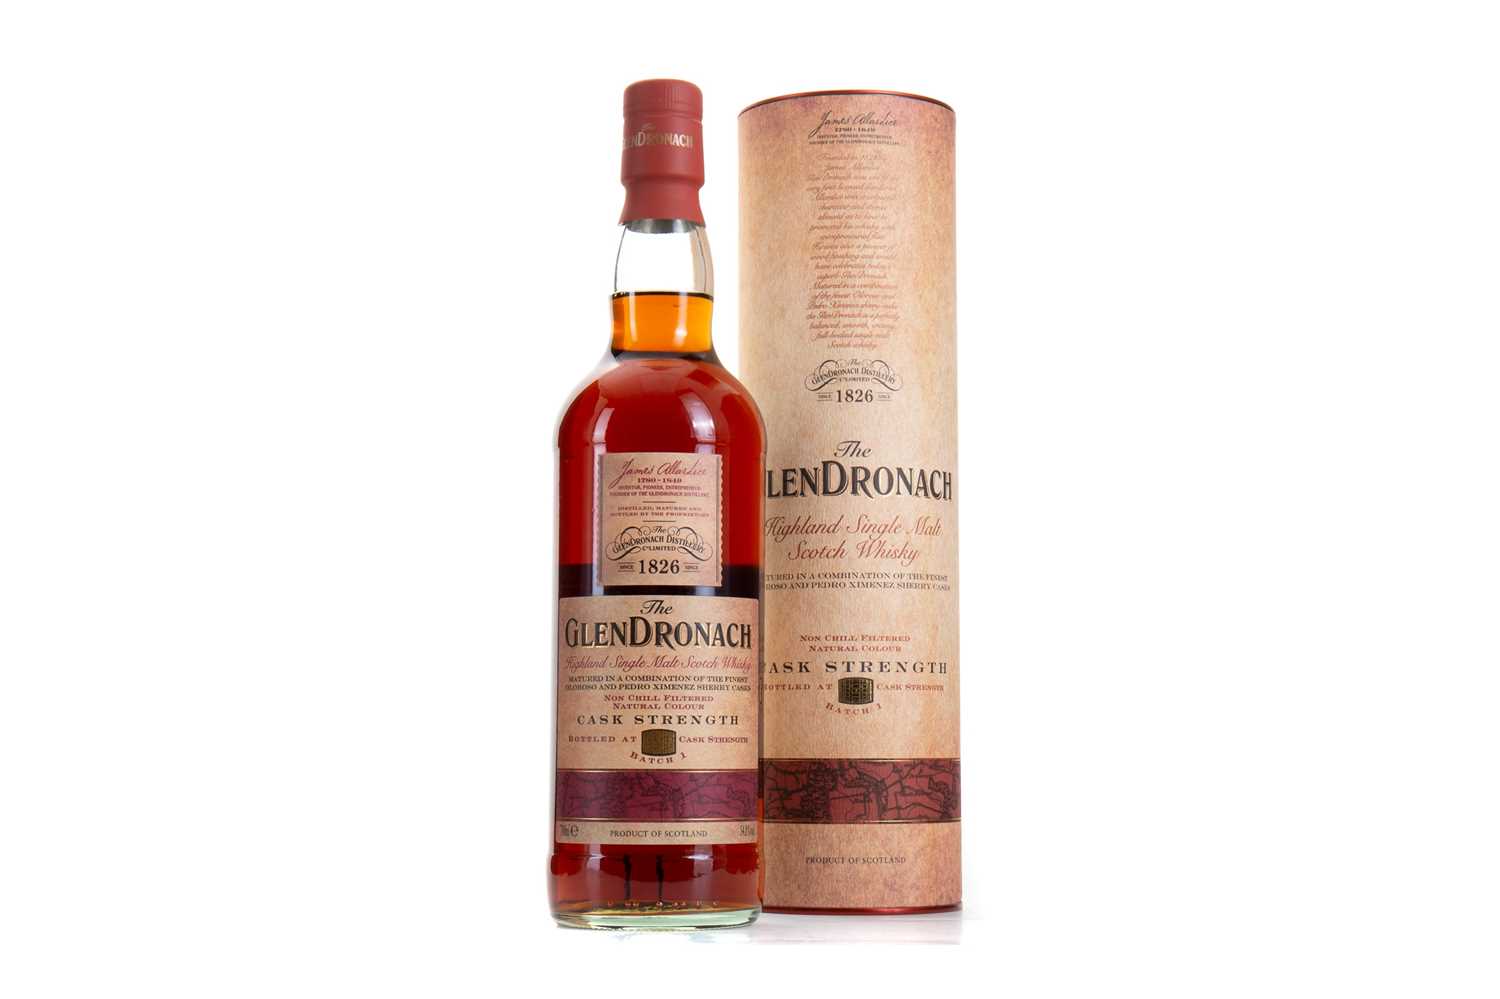 Review: The GlenDronach Cask Strength Batch  Is an Great Single